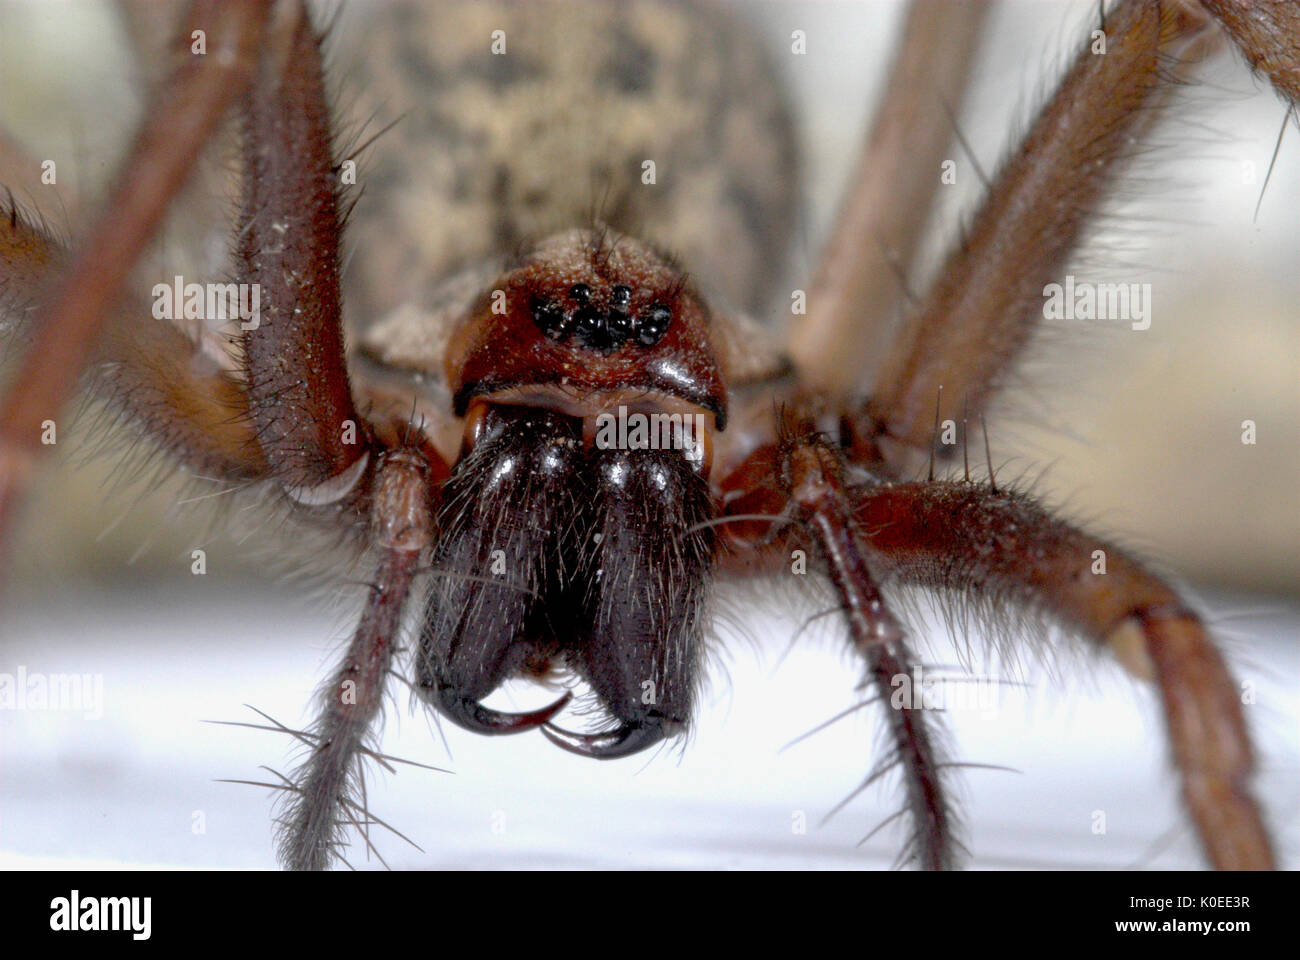 House Spider, Tegenaria gigantea, on brick, close up showing fangs, fear, Stock Photo